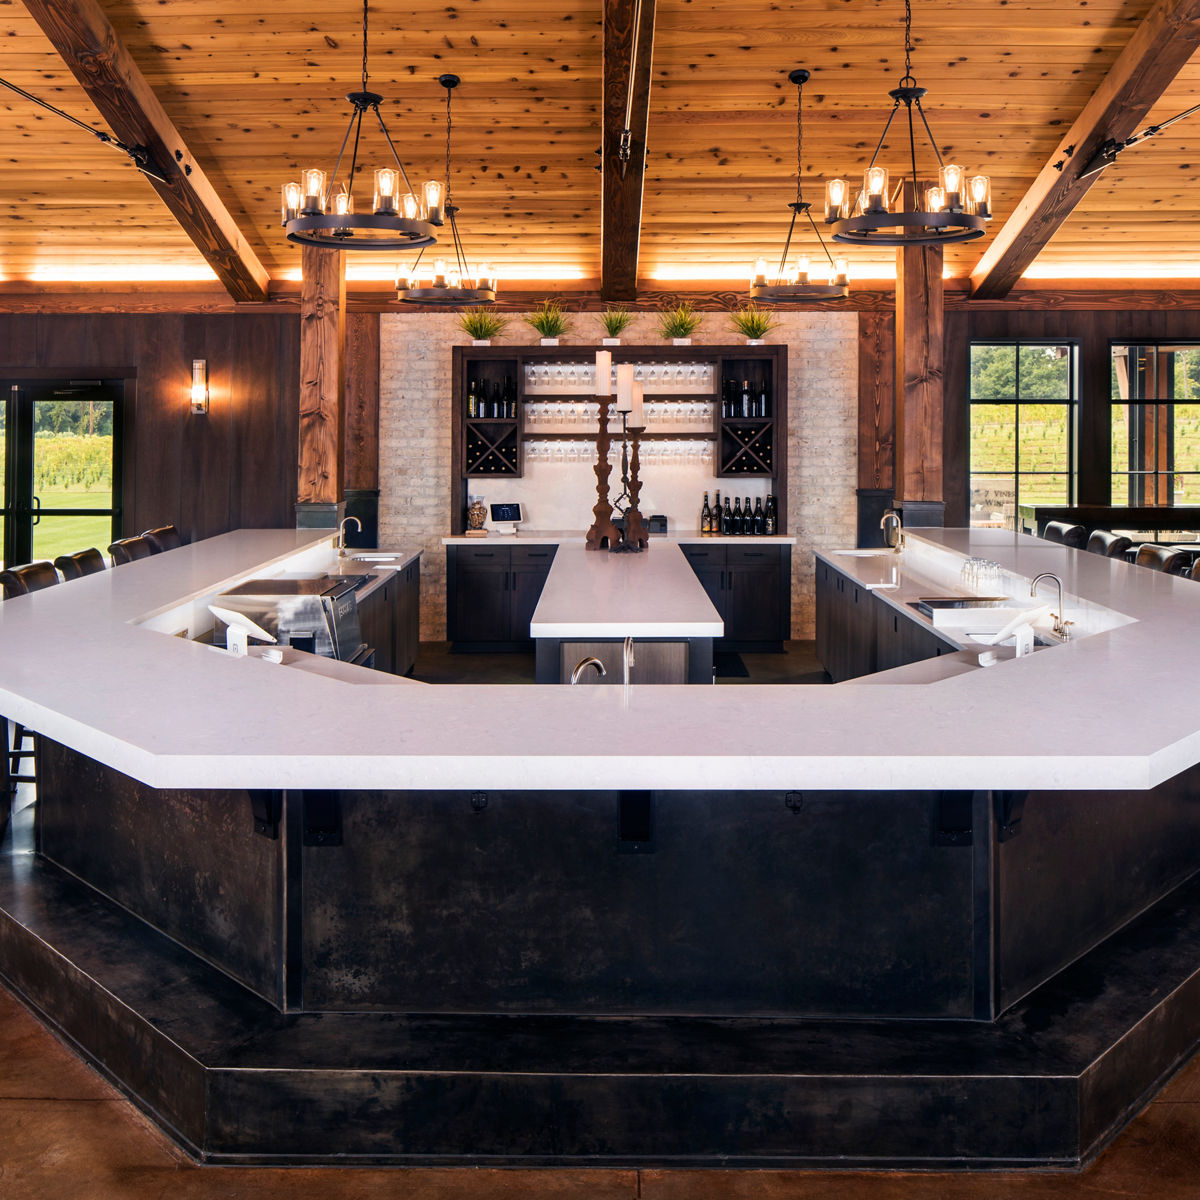 A bar at a winery and vineyard featuring Weybourne quartz countertops